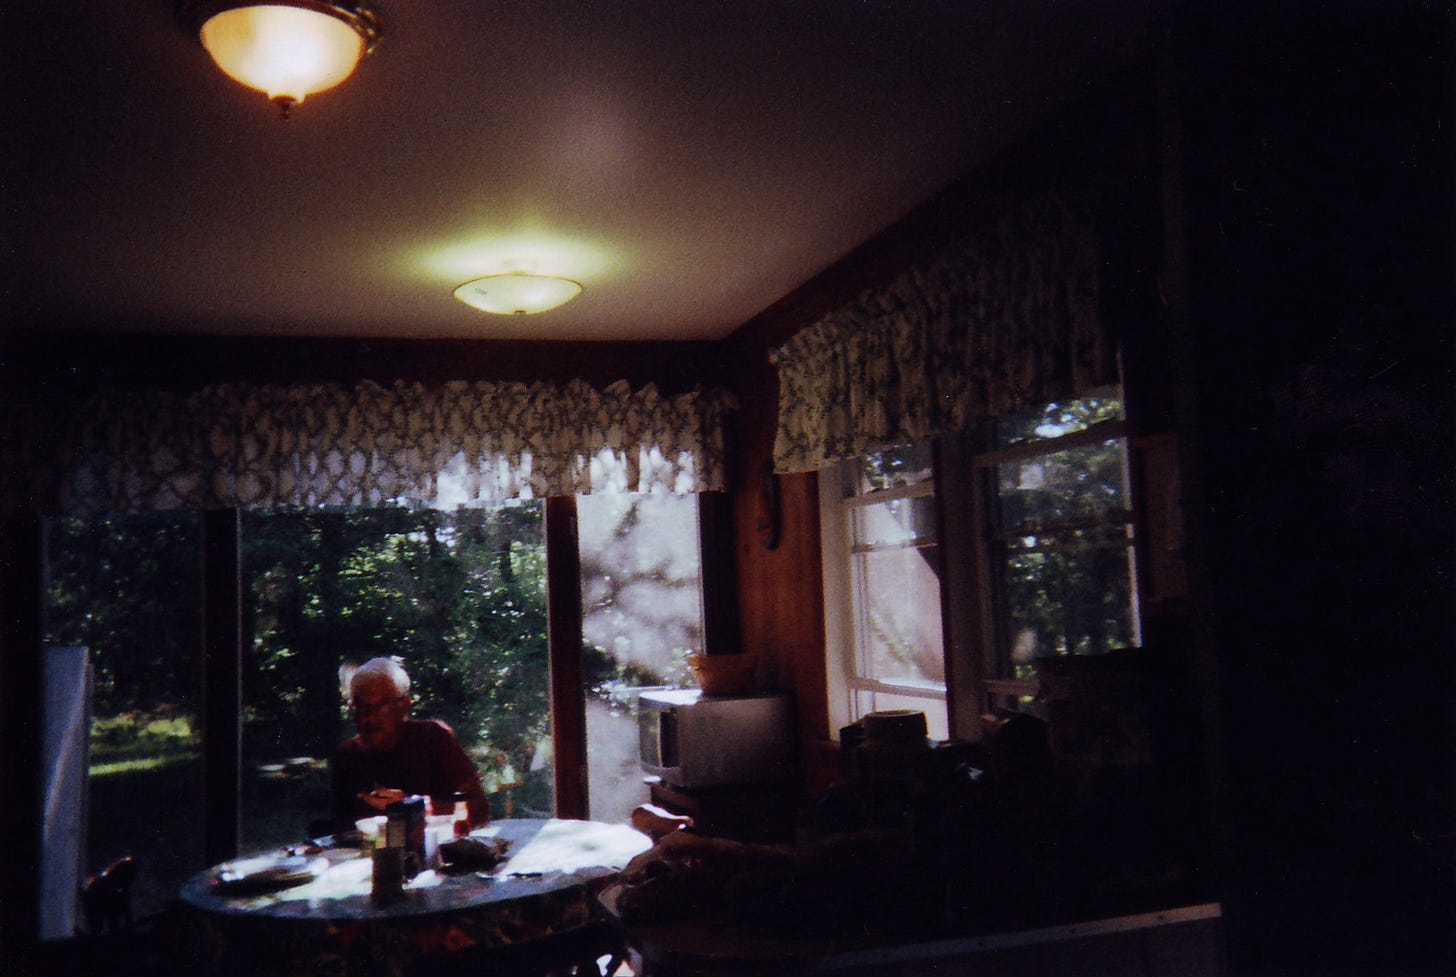 Underexposed photo I took with a disposable camera of my dad sitting at a kitchen table in our Cape rental (luddite teen vibes)